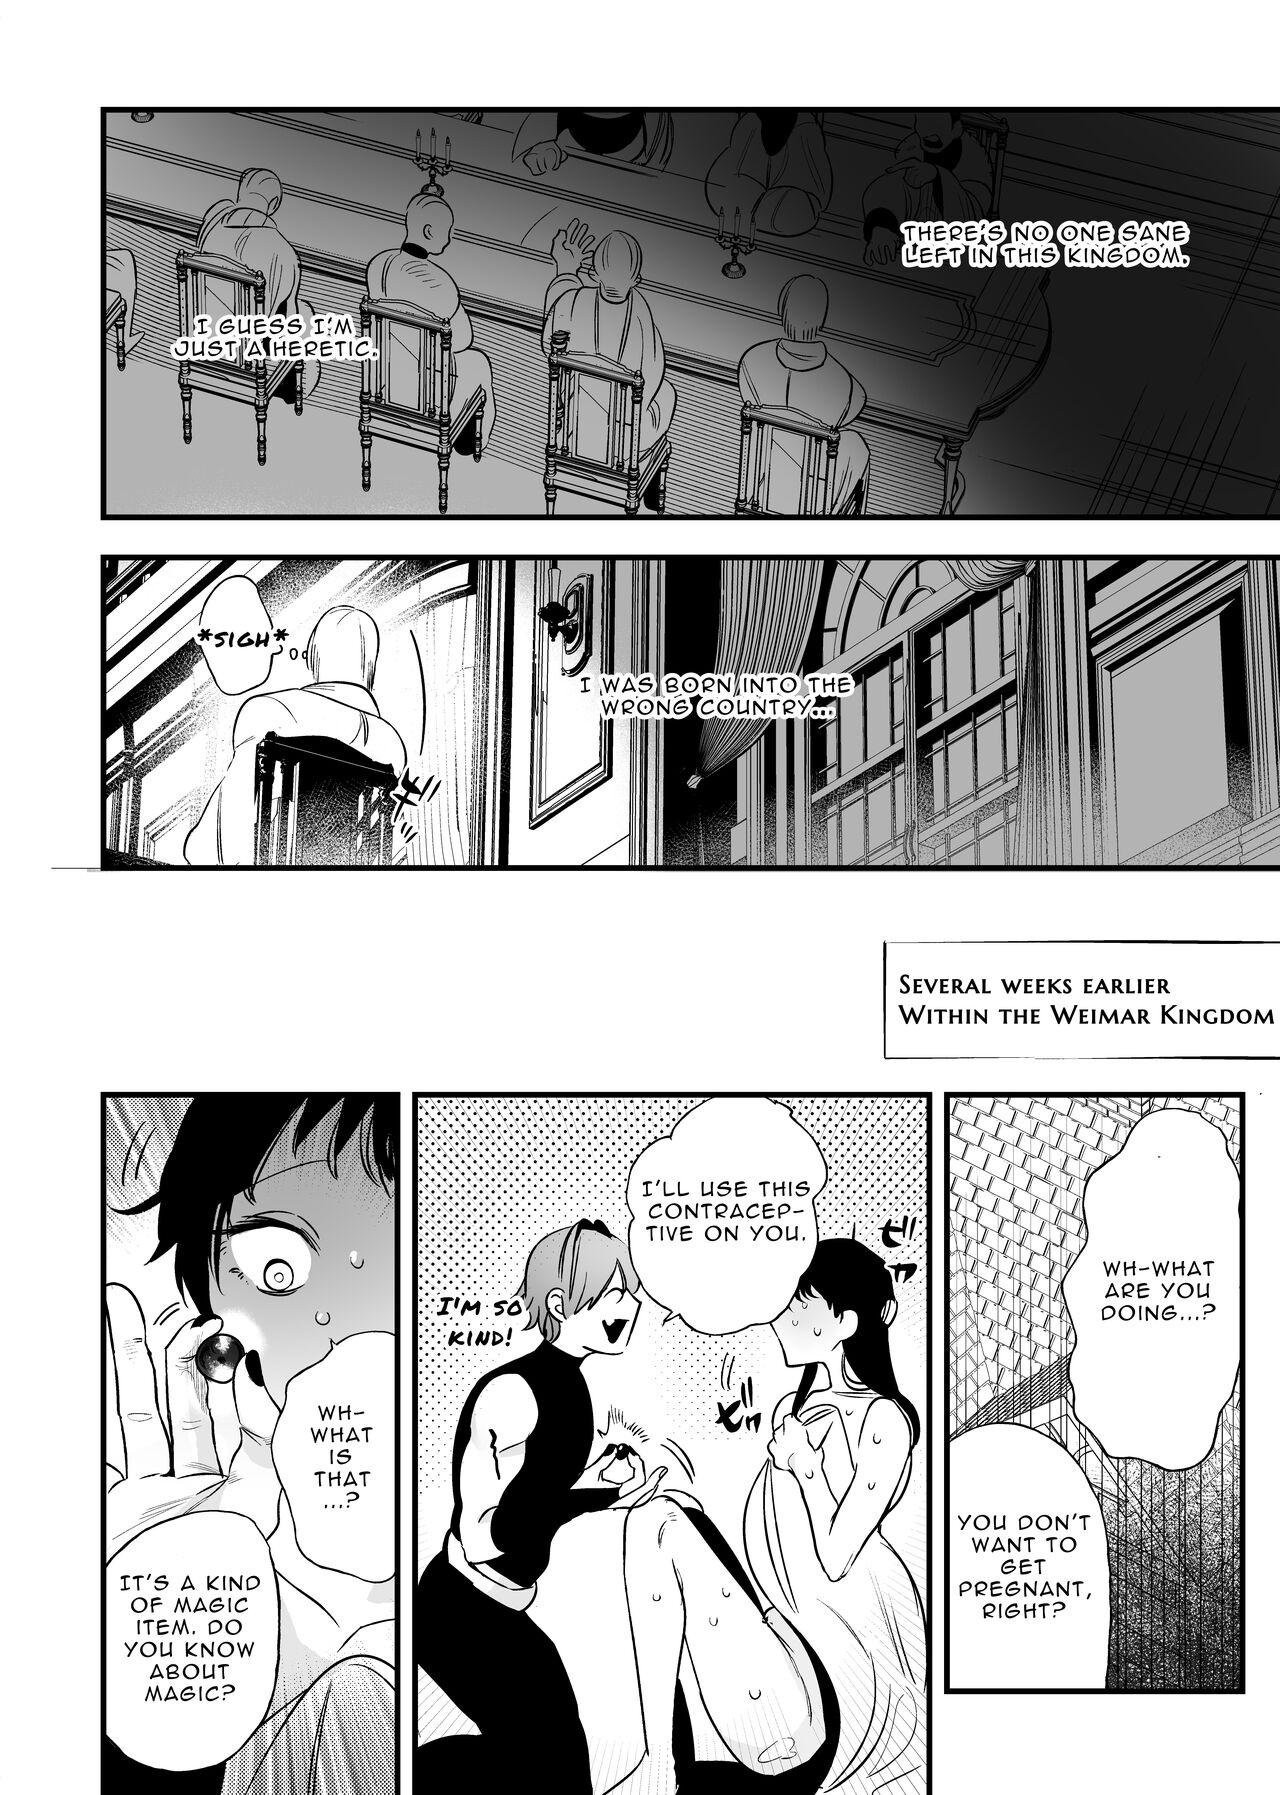 Naked Sluts The Man Who Saved Me on my Isekai Trip was a Killer... 2 - Original Roludo - Page 8